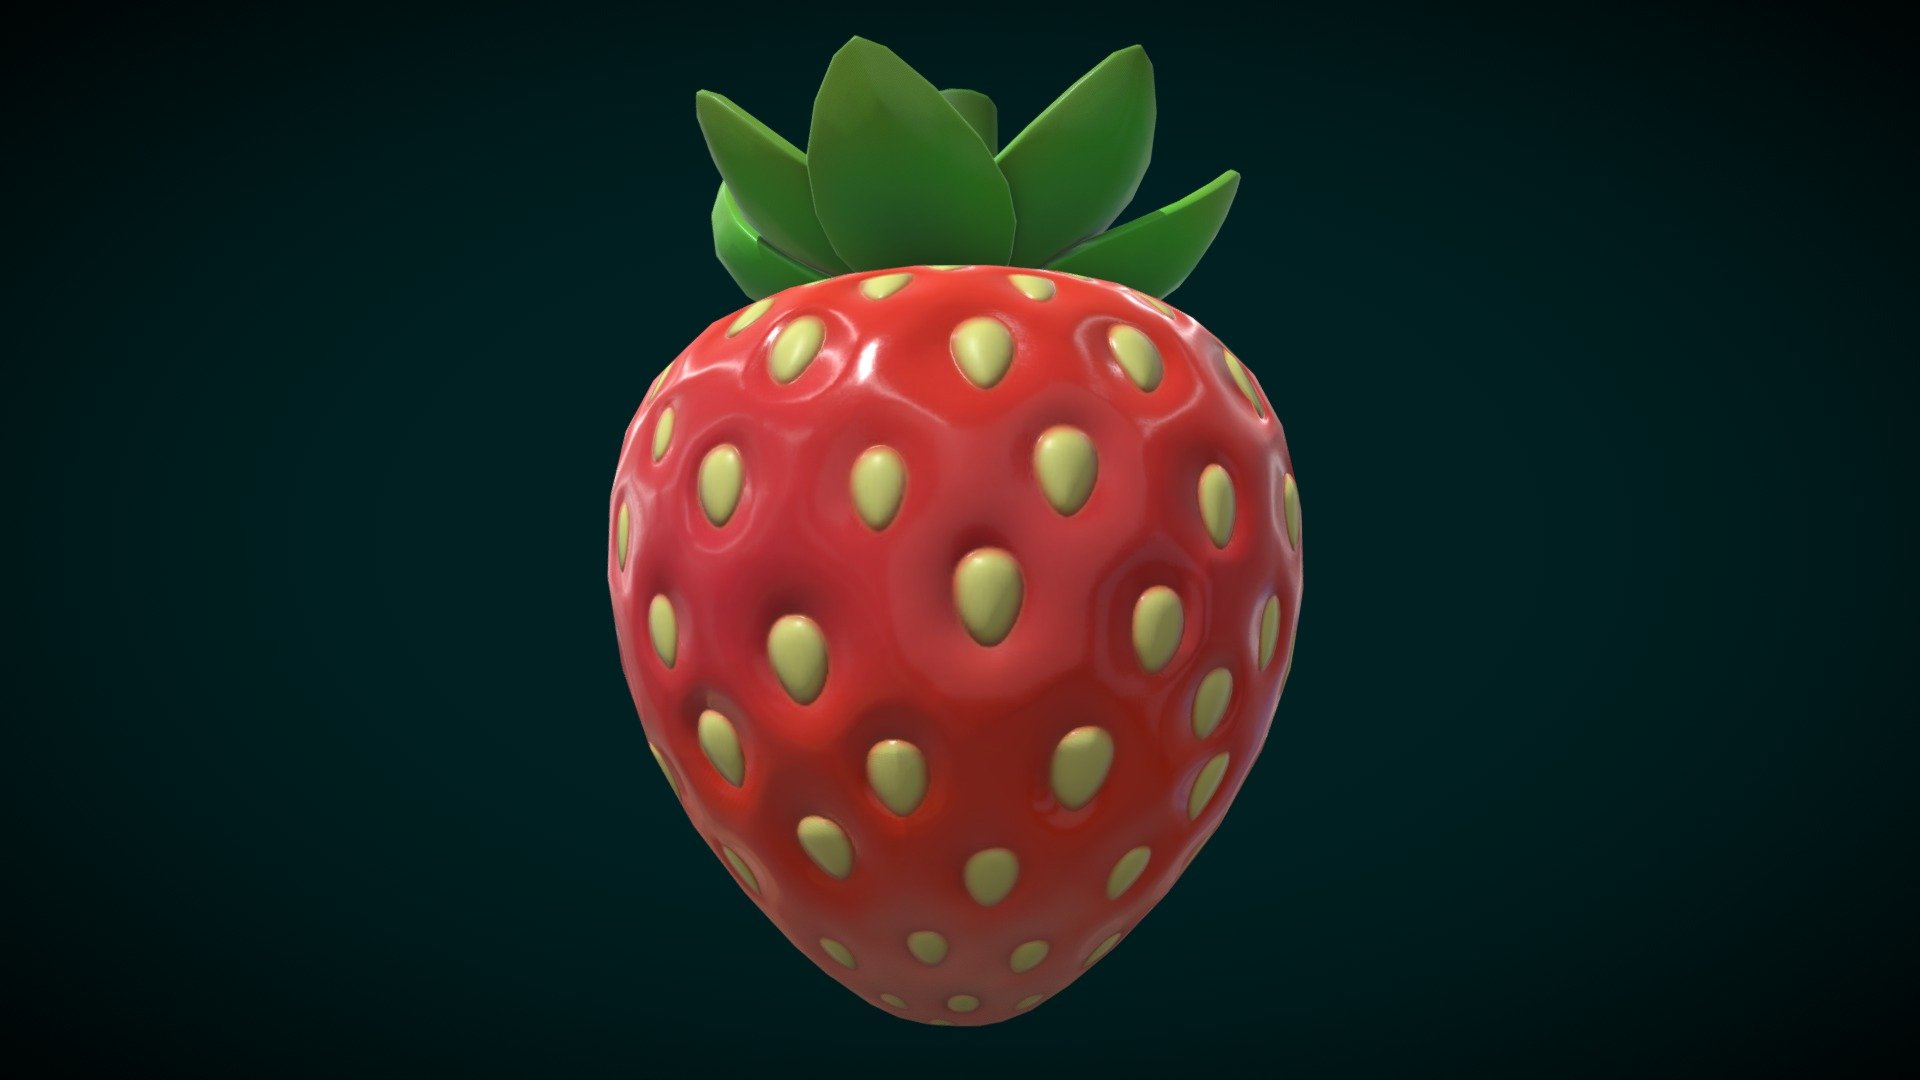 PBR textured strawberry model.
4098 triangular faces.

Measure units are millimeters, the model is about 26 m in height (yeah, a big one).

Mesh is manifold, no holes, no inverted faces, no bad contiguous edges. So strictly speaking it is print ready. 

Available formats: .blend, .stl, .obj, .fbx, .dae

To sets of textures: 
for metal-roughness workflow and for UE4.

Met-rough textures: 

Base color,   

normal map(OpenGL and Diretx),

AO, 
Metal(just flat color), 
Roughness       

All textures are packed into .blend file and available in a separate archive in 1024 and 2048 square resolutions. Cycles material is inside of blender file 3d model